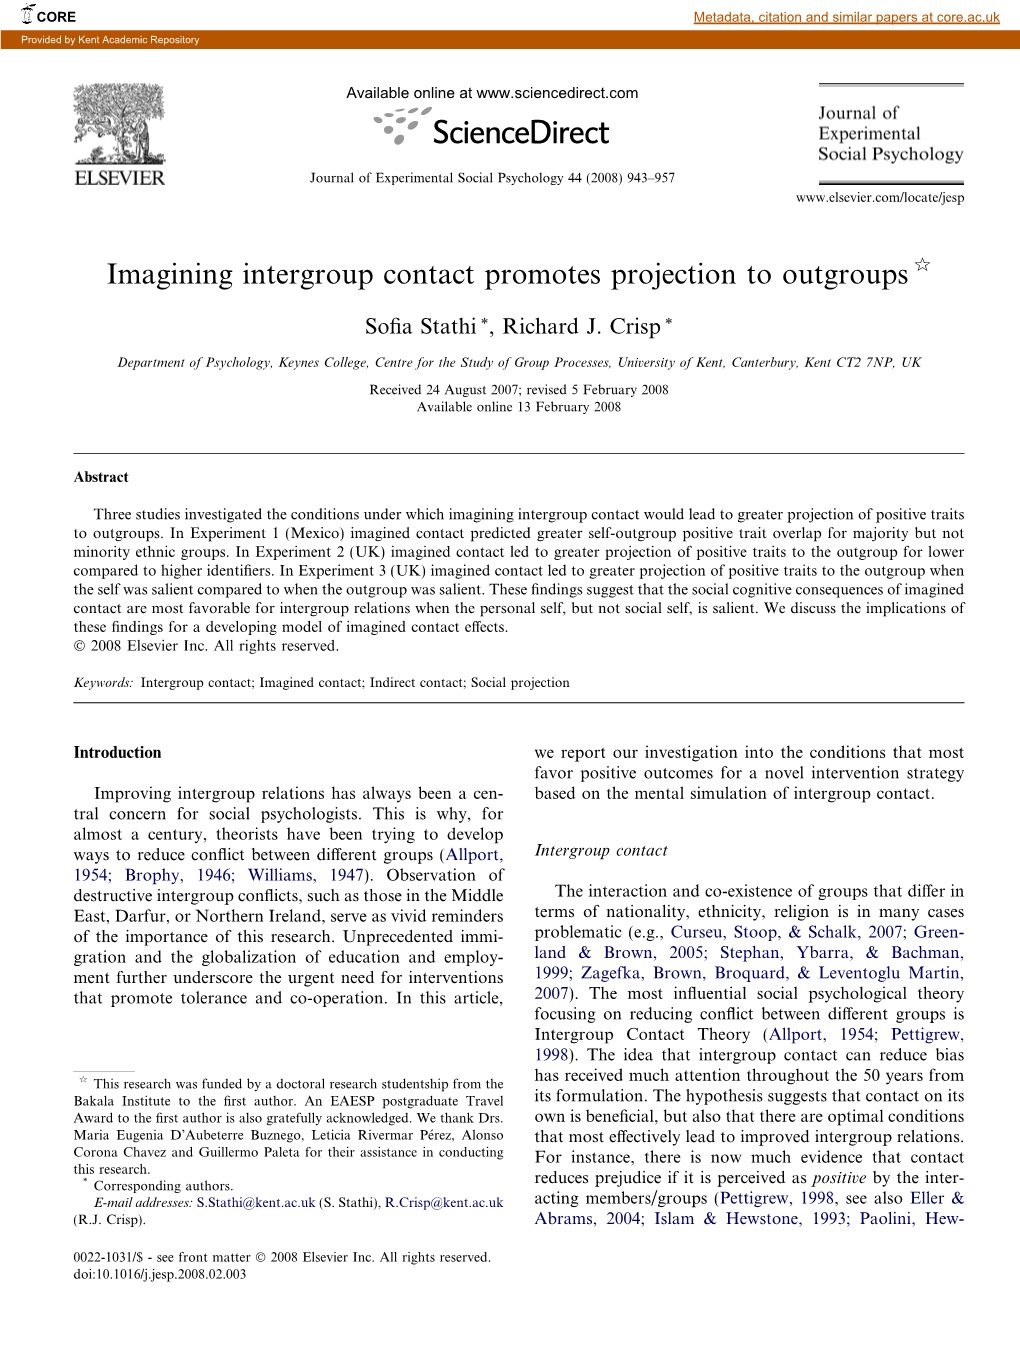 Imagining Intergroup Contact Promotes Projection to Outgroups Q